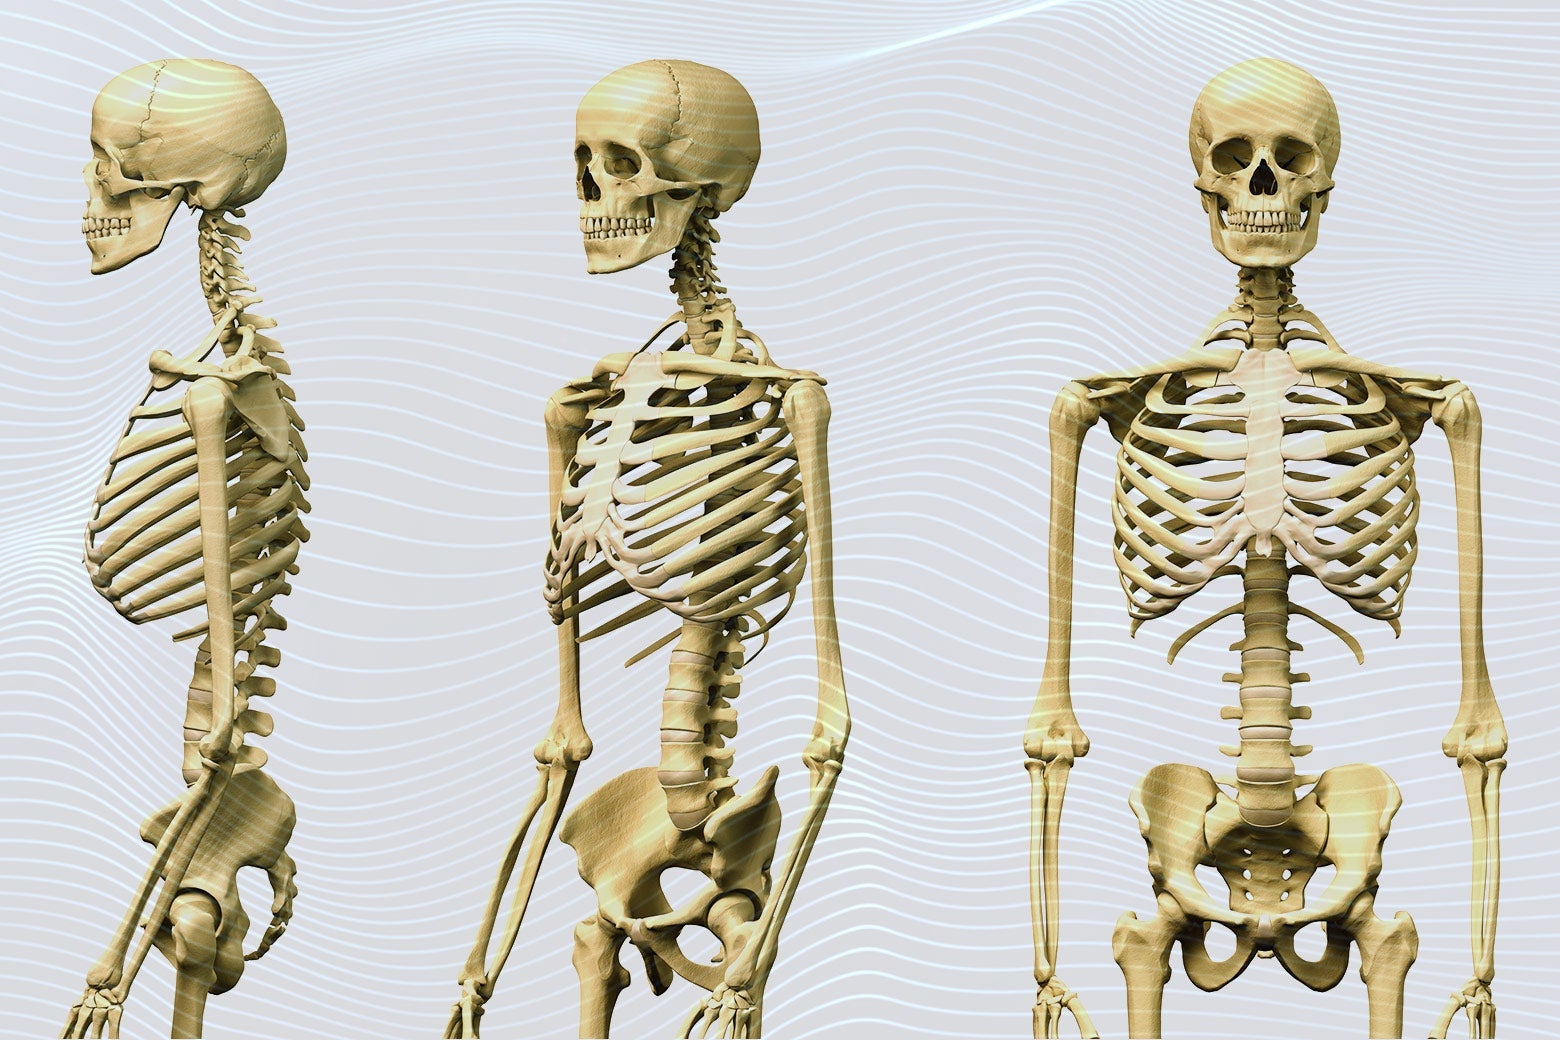 Three skeletons against a wavy 3D printed-type background.